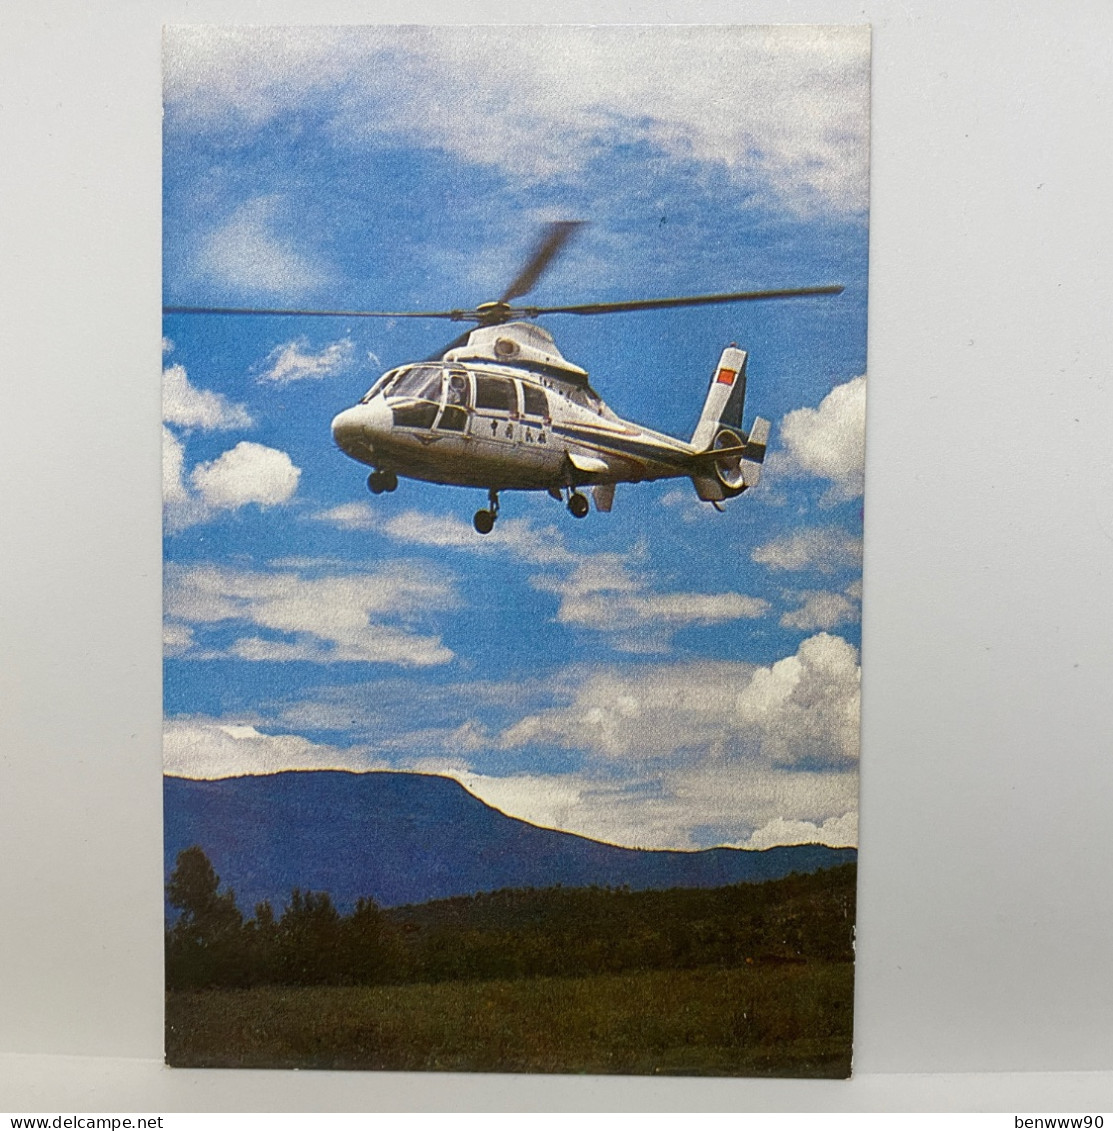 Luoyang, CAAC Dolphin Heliopter, China Postcard - Helicopters